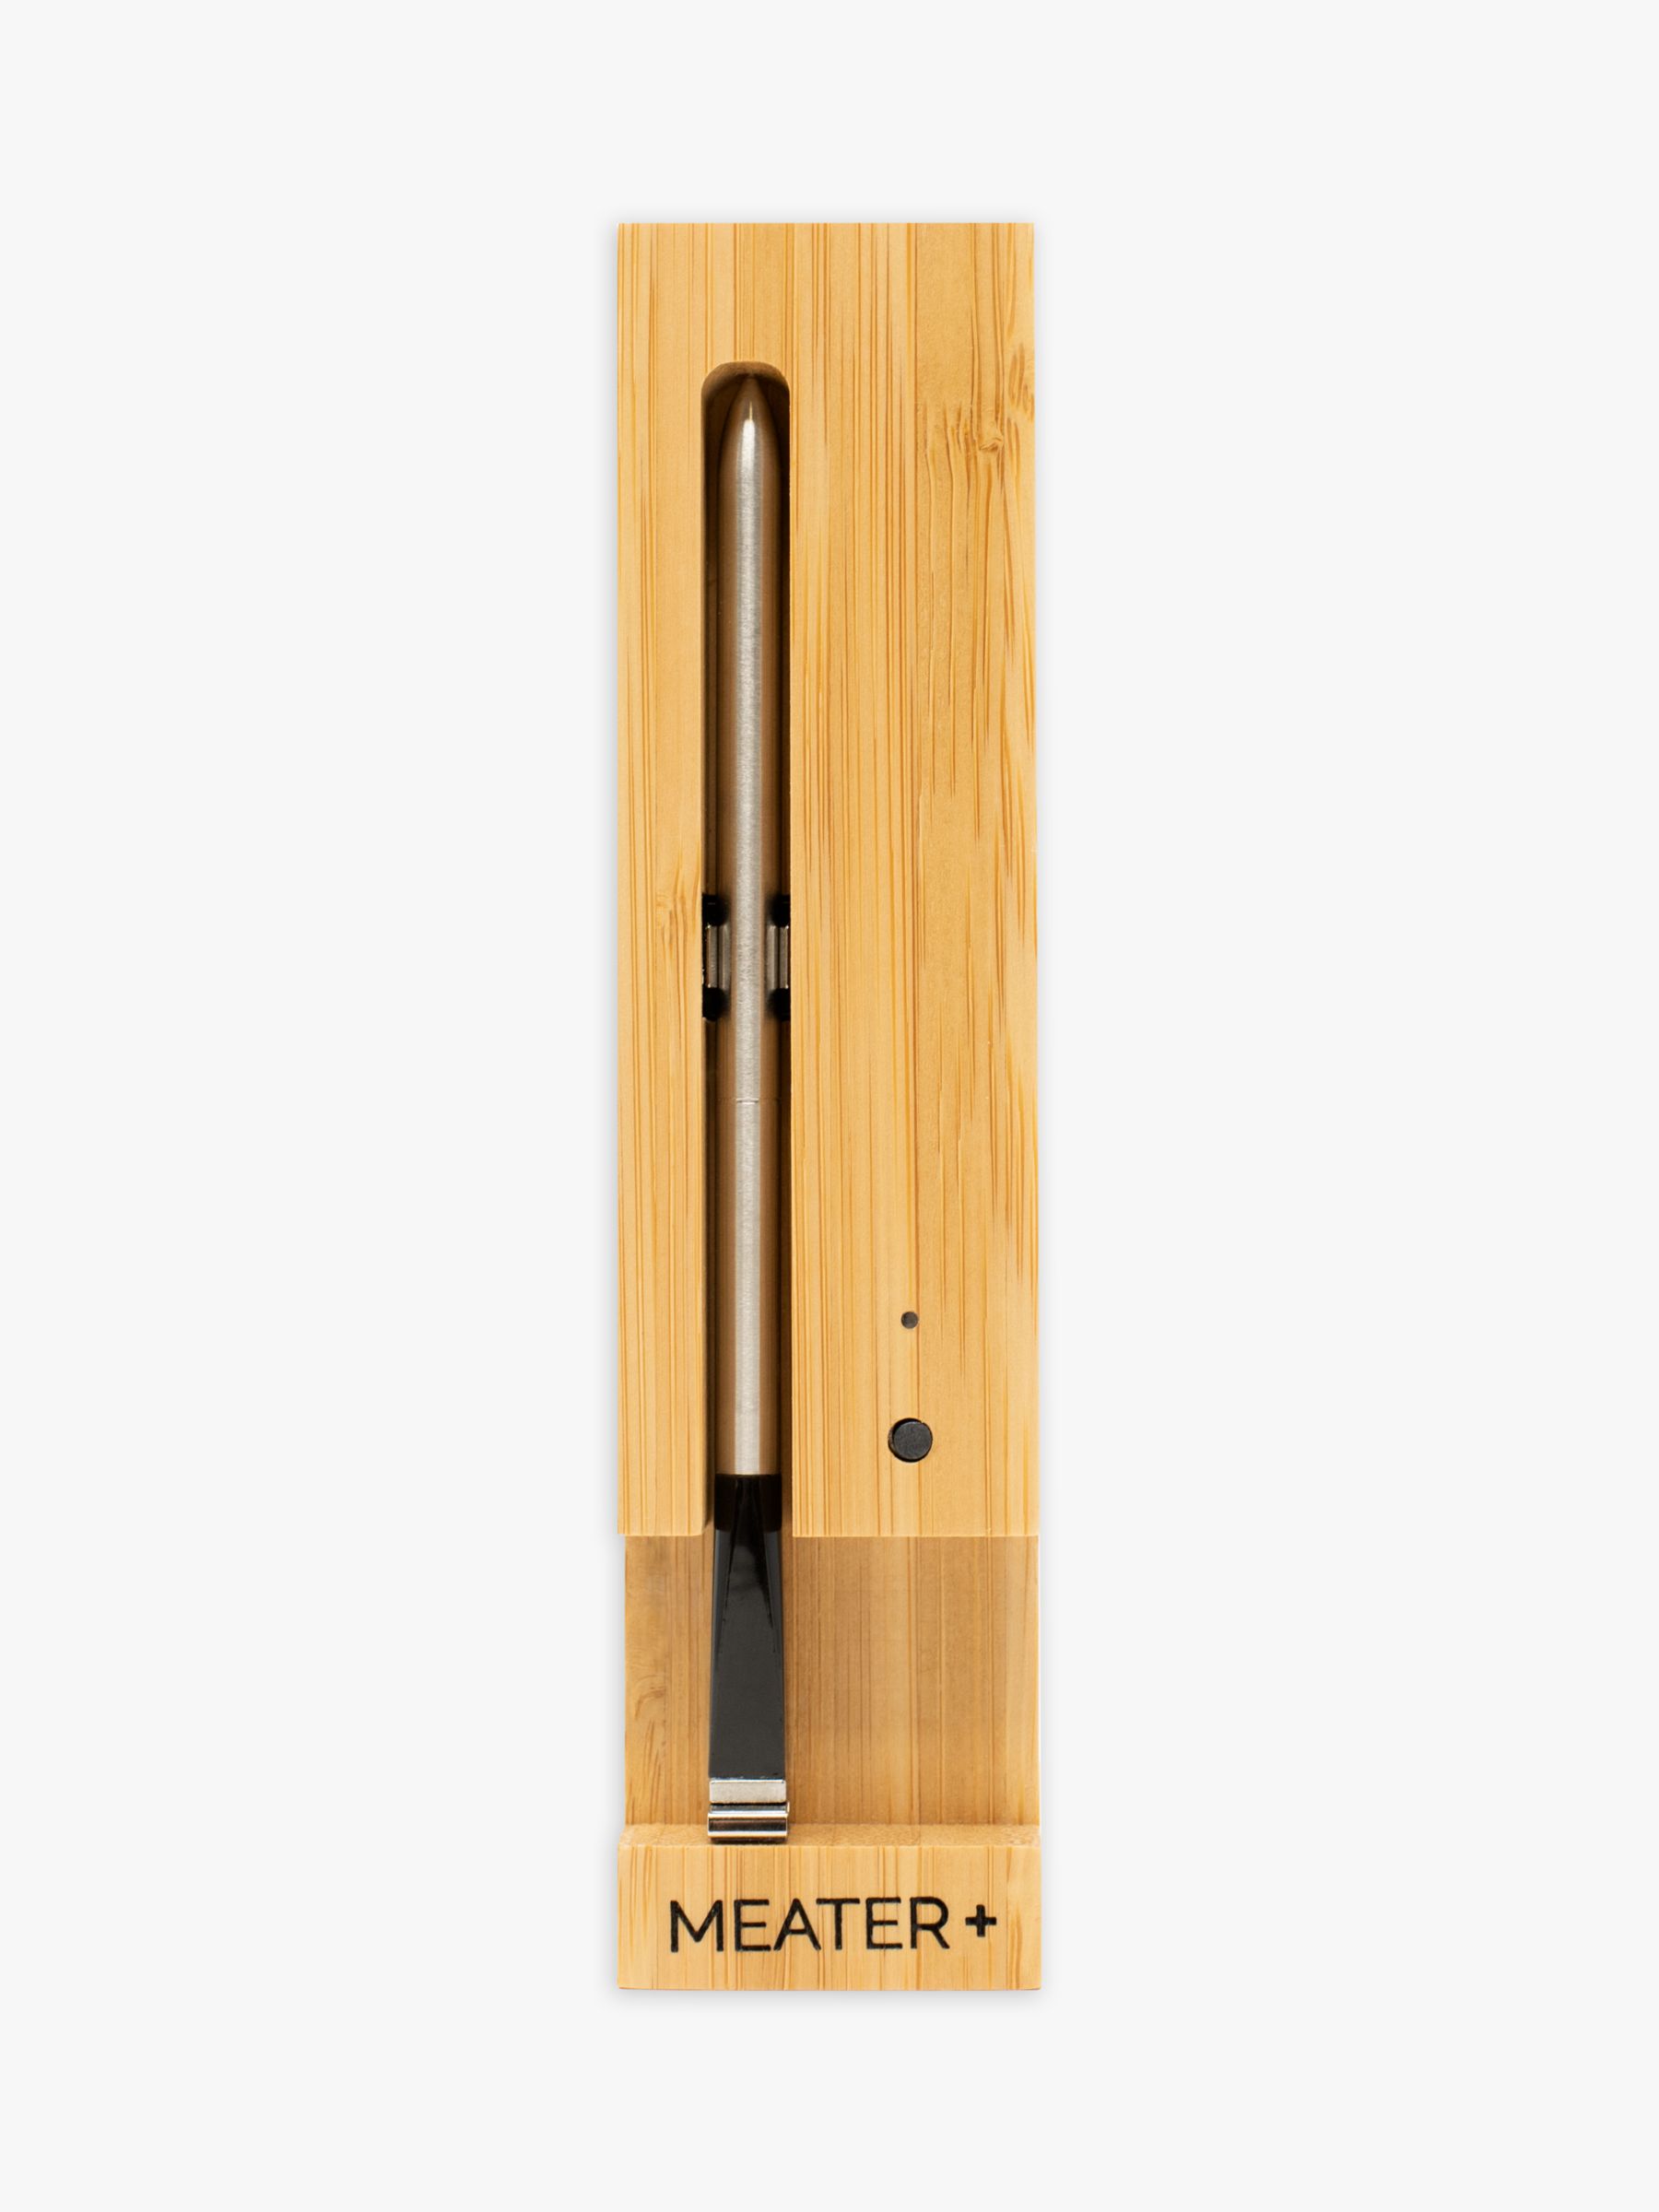 Meater Plus BBQ Wireless Smart Meat Thermometer